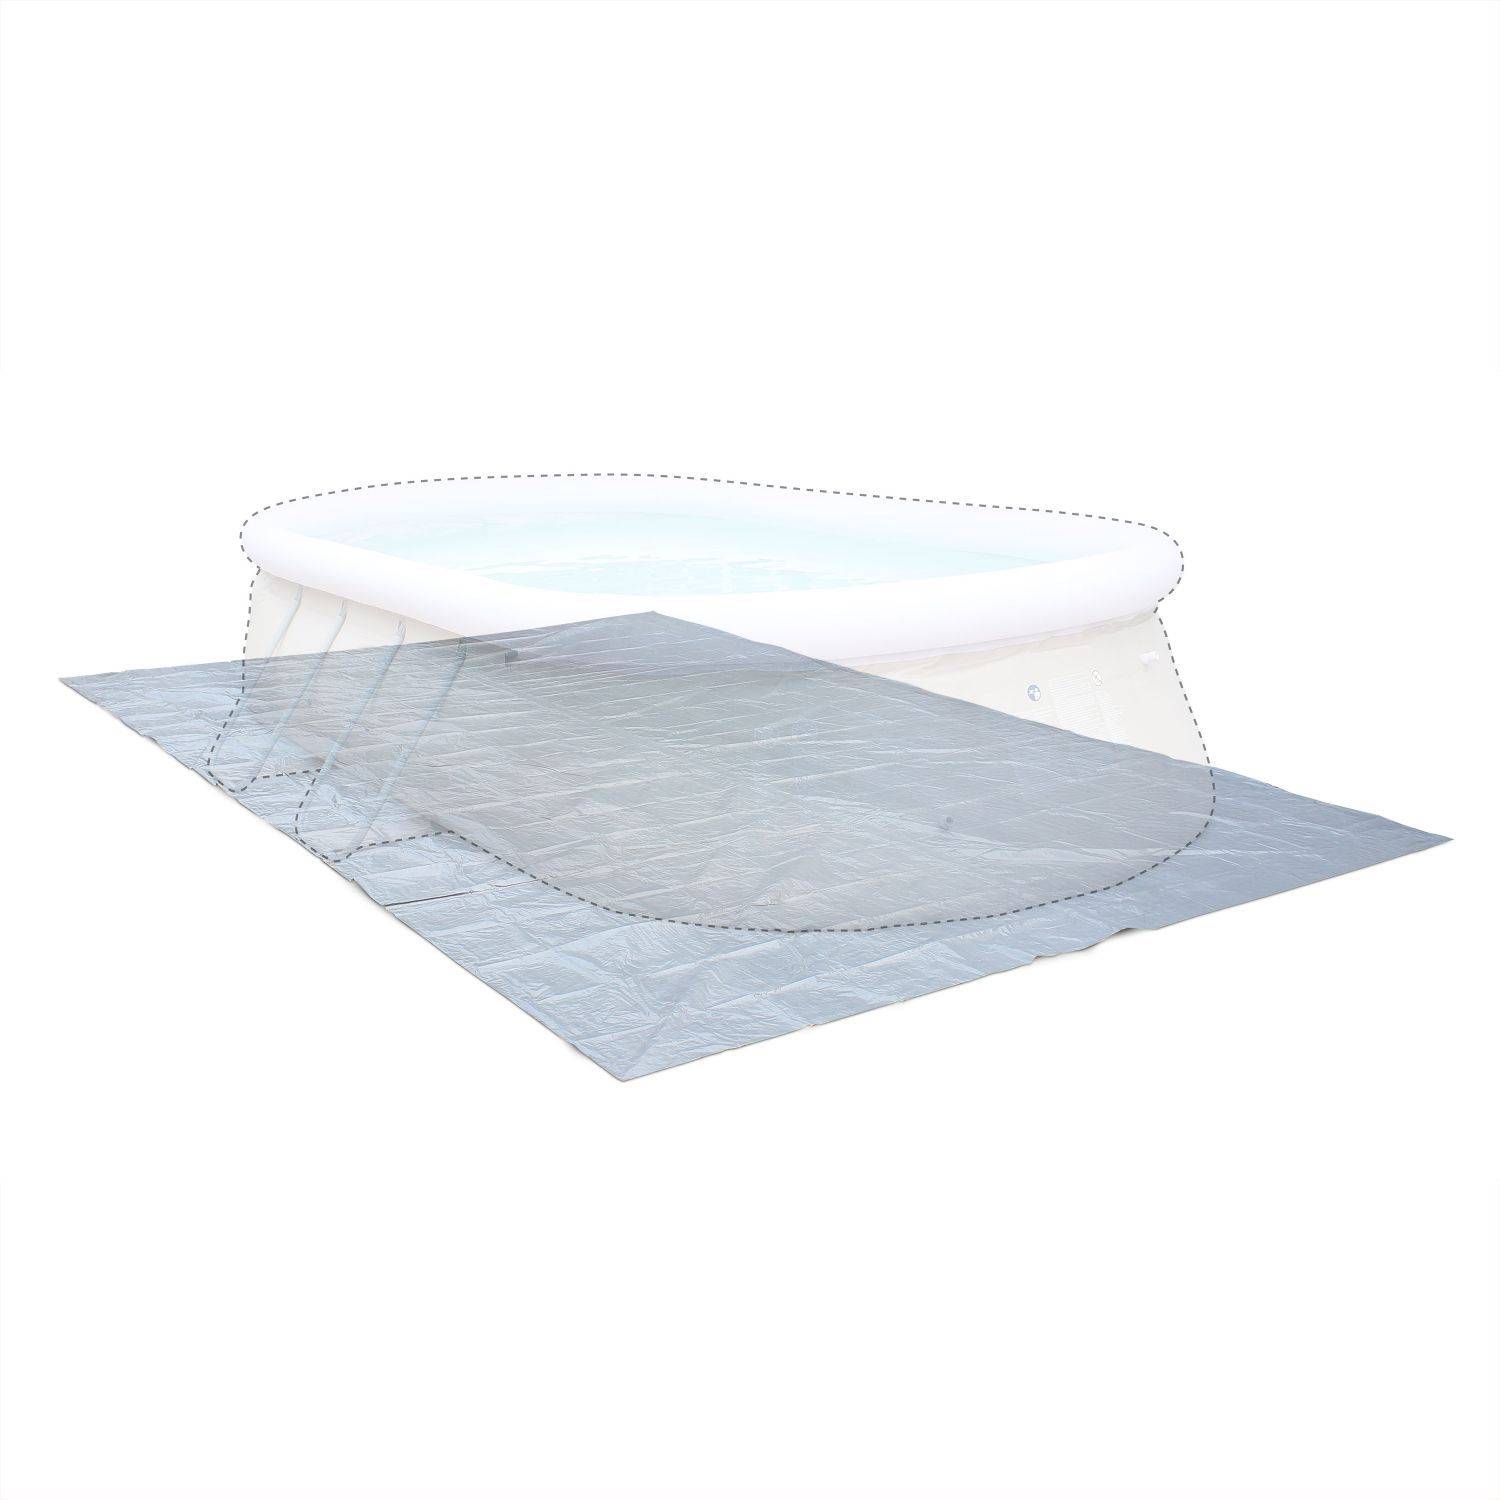 Grey 583 x 390cm ground cloth for 540 x 300cm above ground rectangular frame pool, cover, floor protector for Onyx swimming pool. Photo1